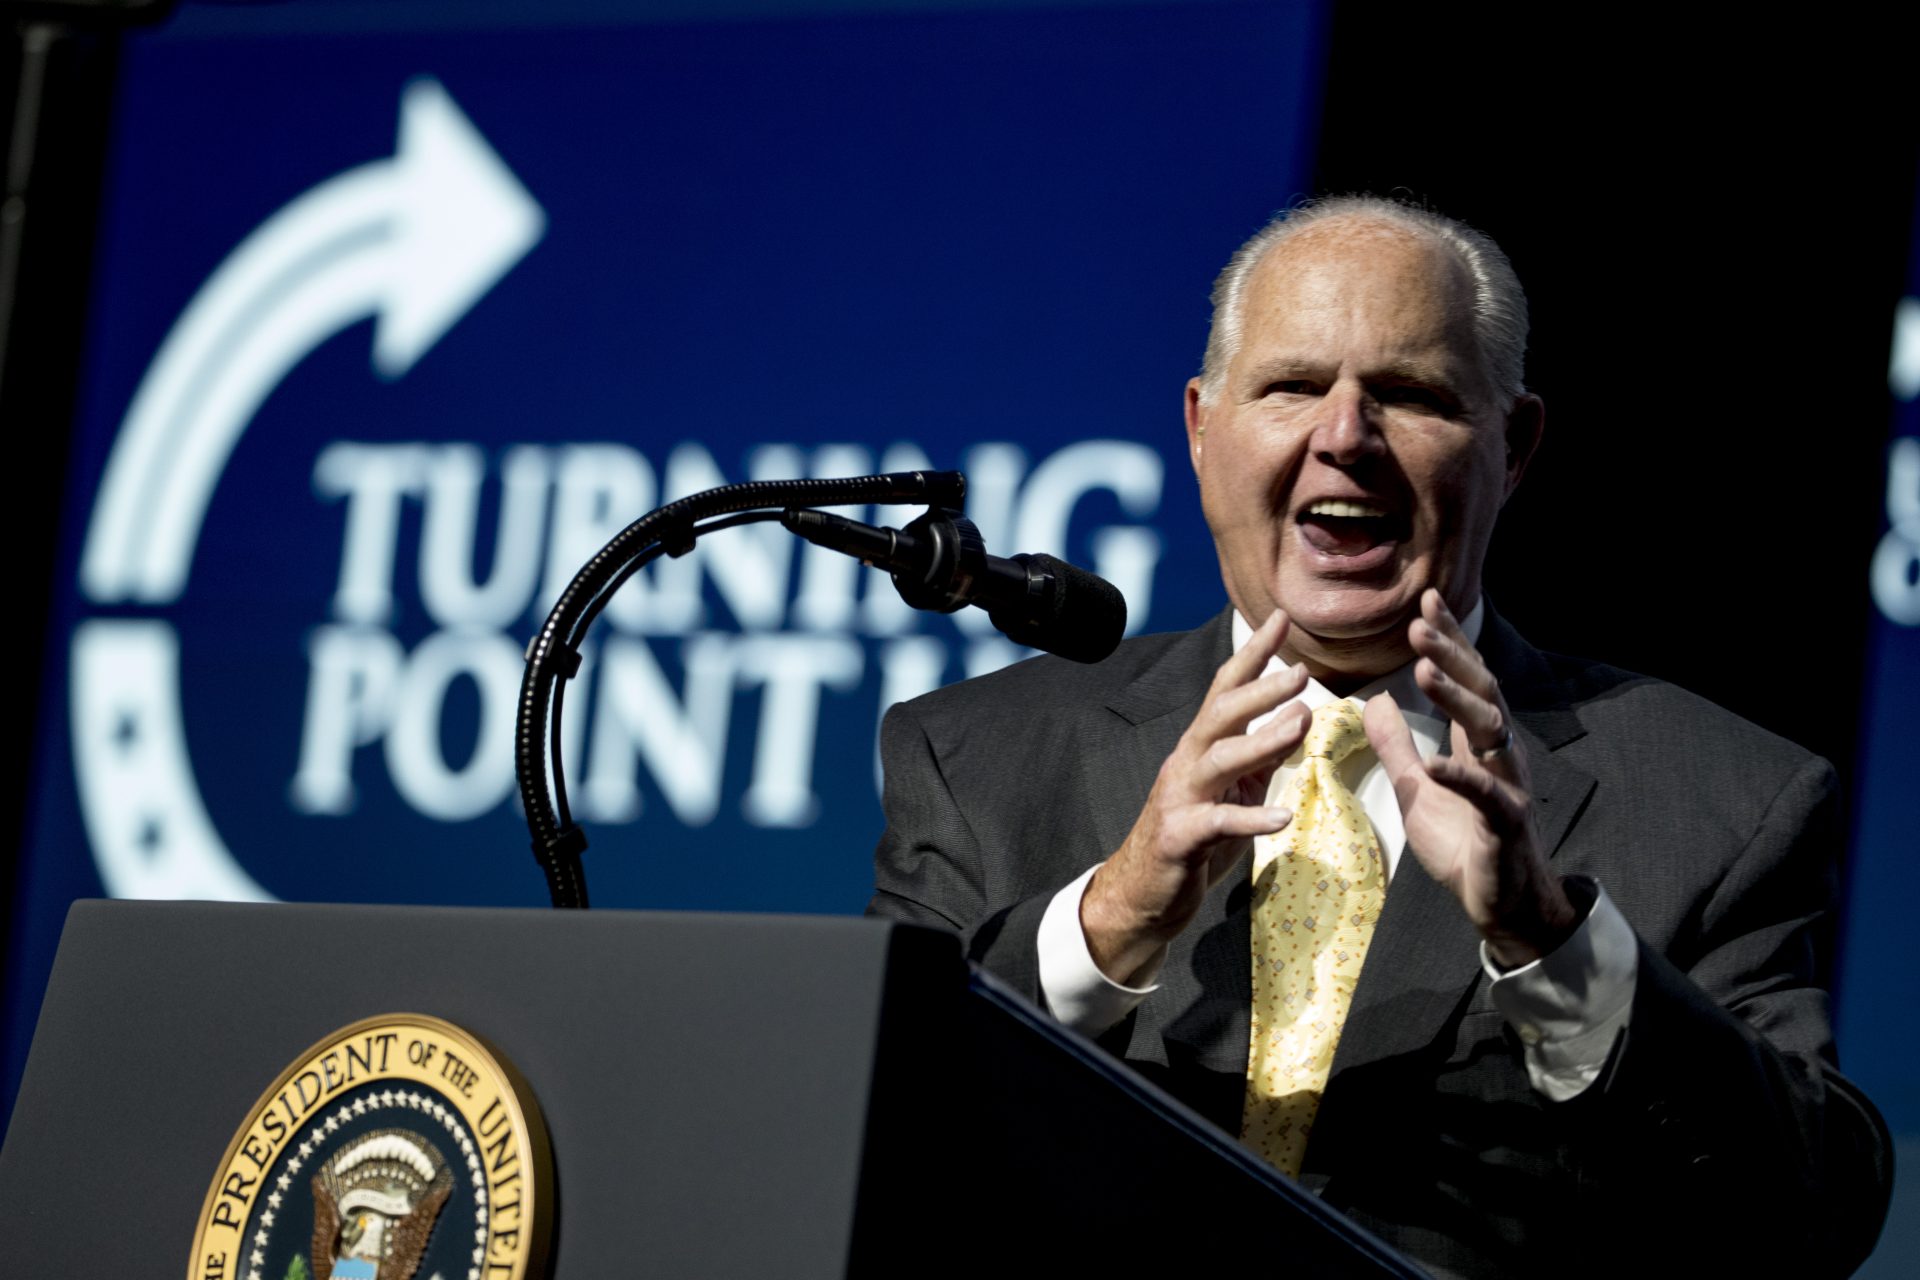 Radio personality Rush Limbaugh speaks before introducing President Donald Trump at the Turning Point USA Student Action Summit at the Palm Beach County Convention Center in West Palm Beach, Fla., Saturday, Dec. 21, 2019.